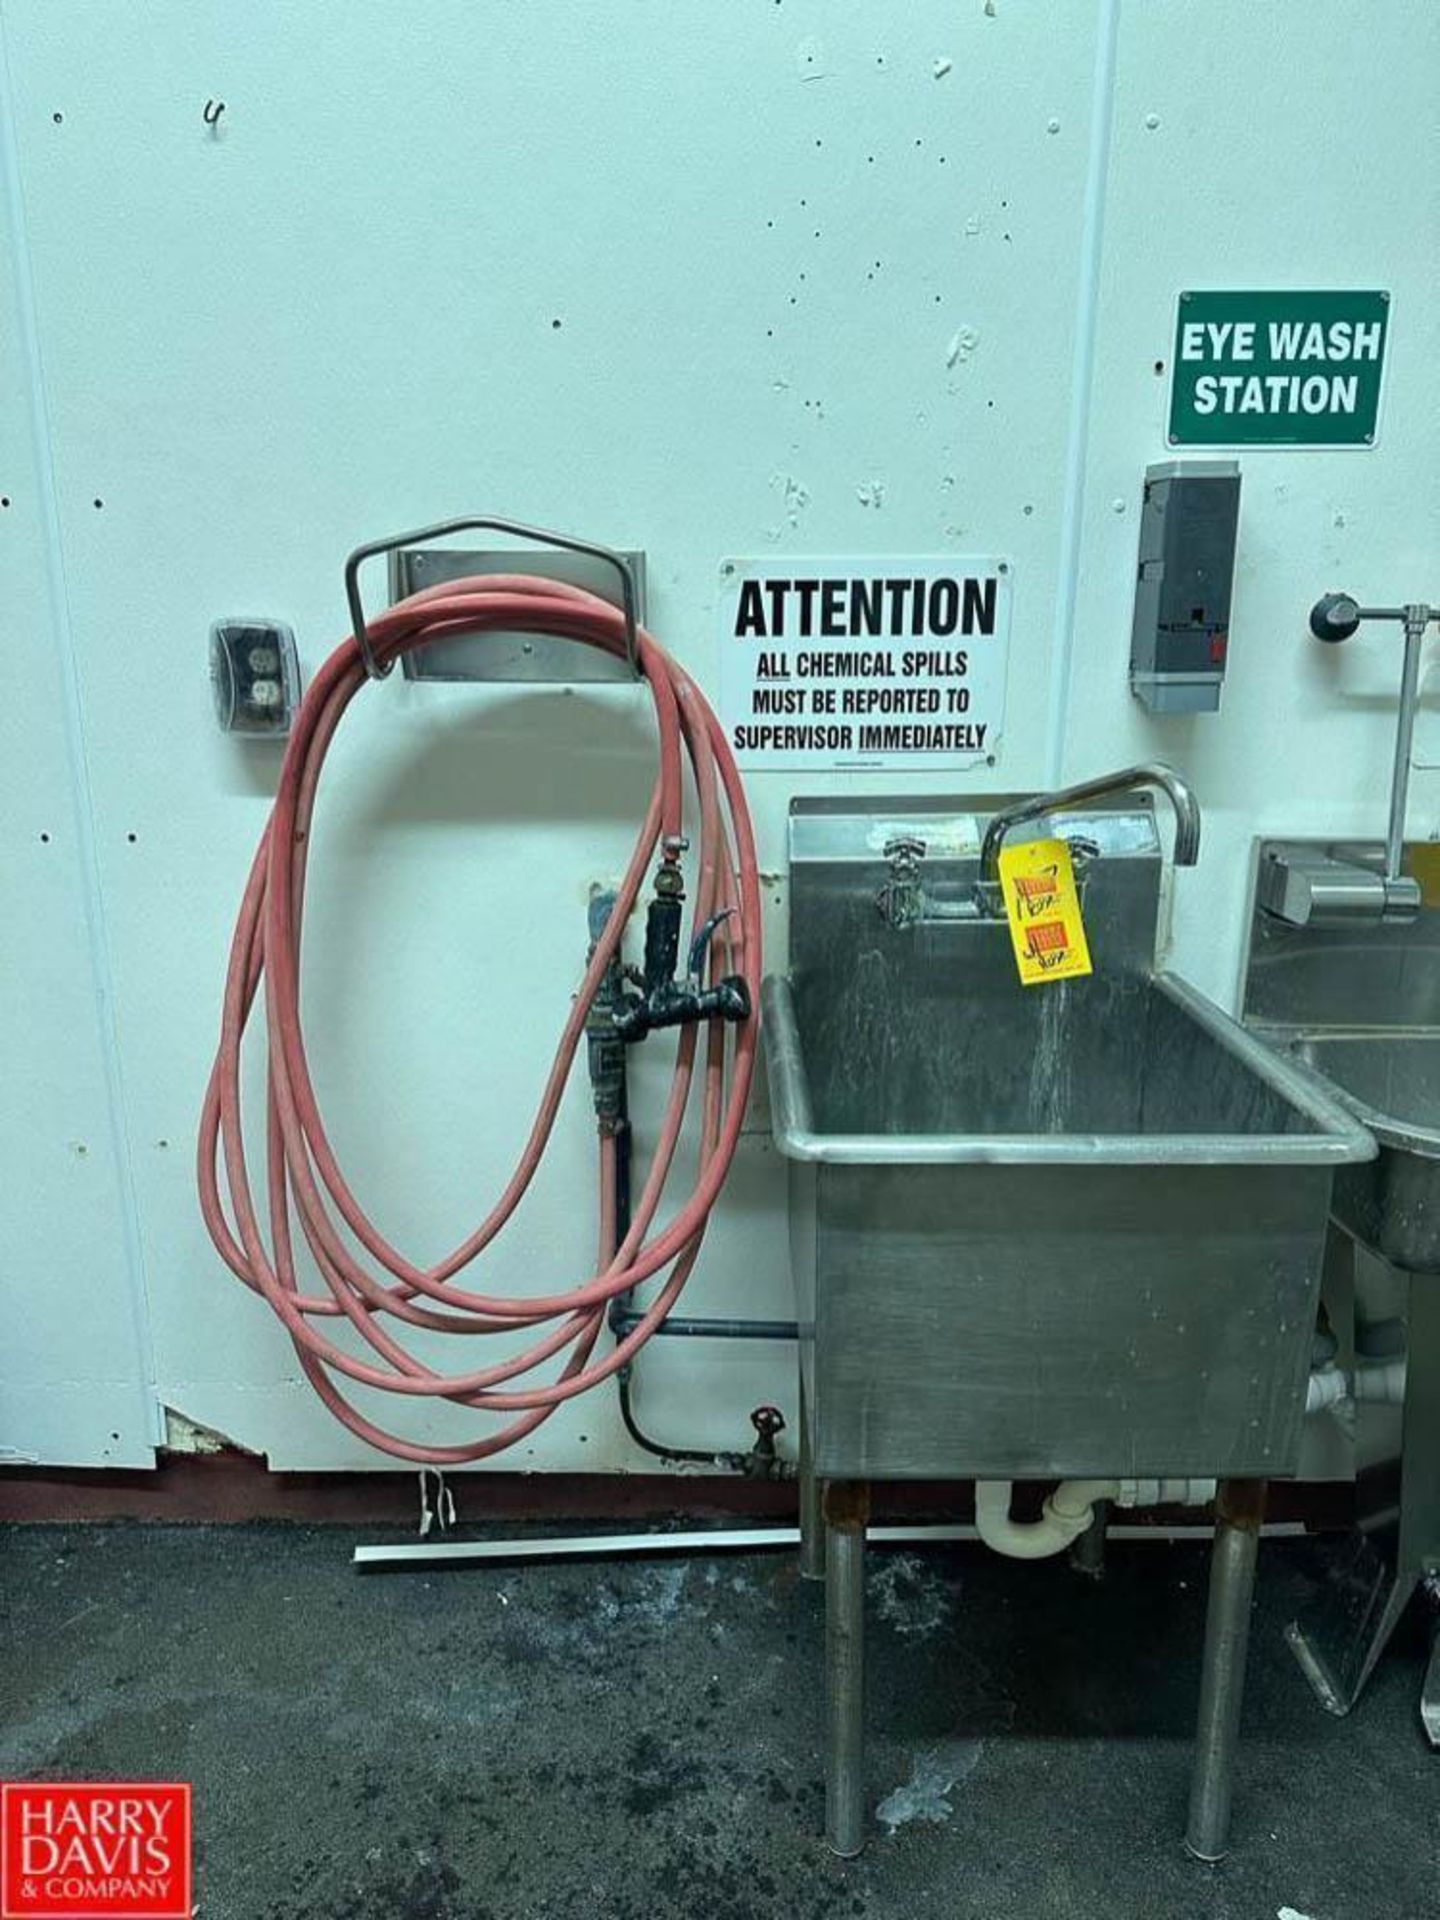 S/S Sink with Hose Station and Sprayer - Rigging Fee: $250